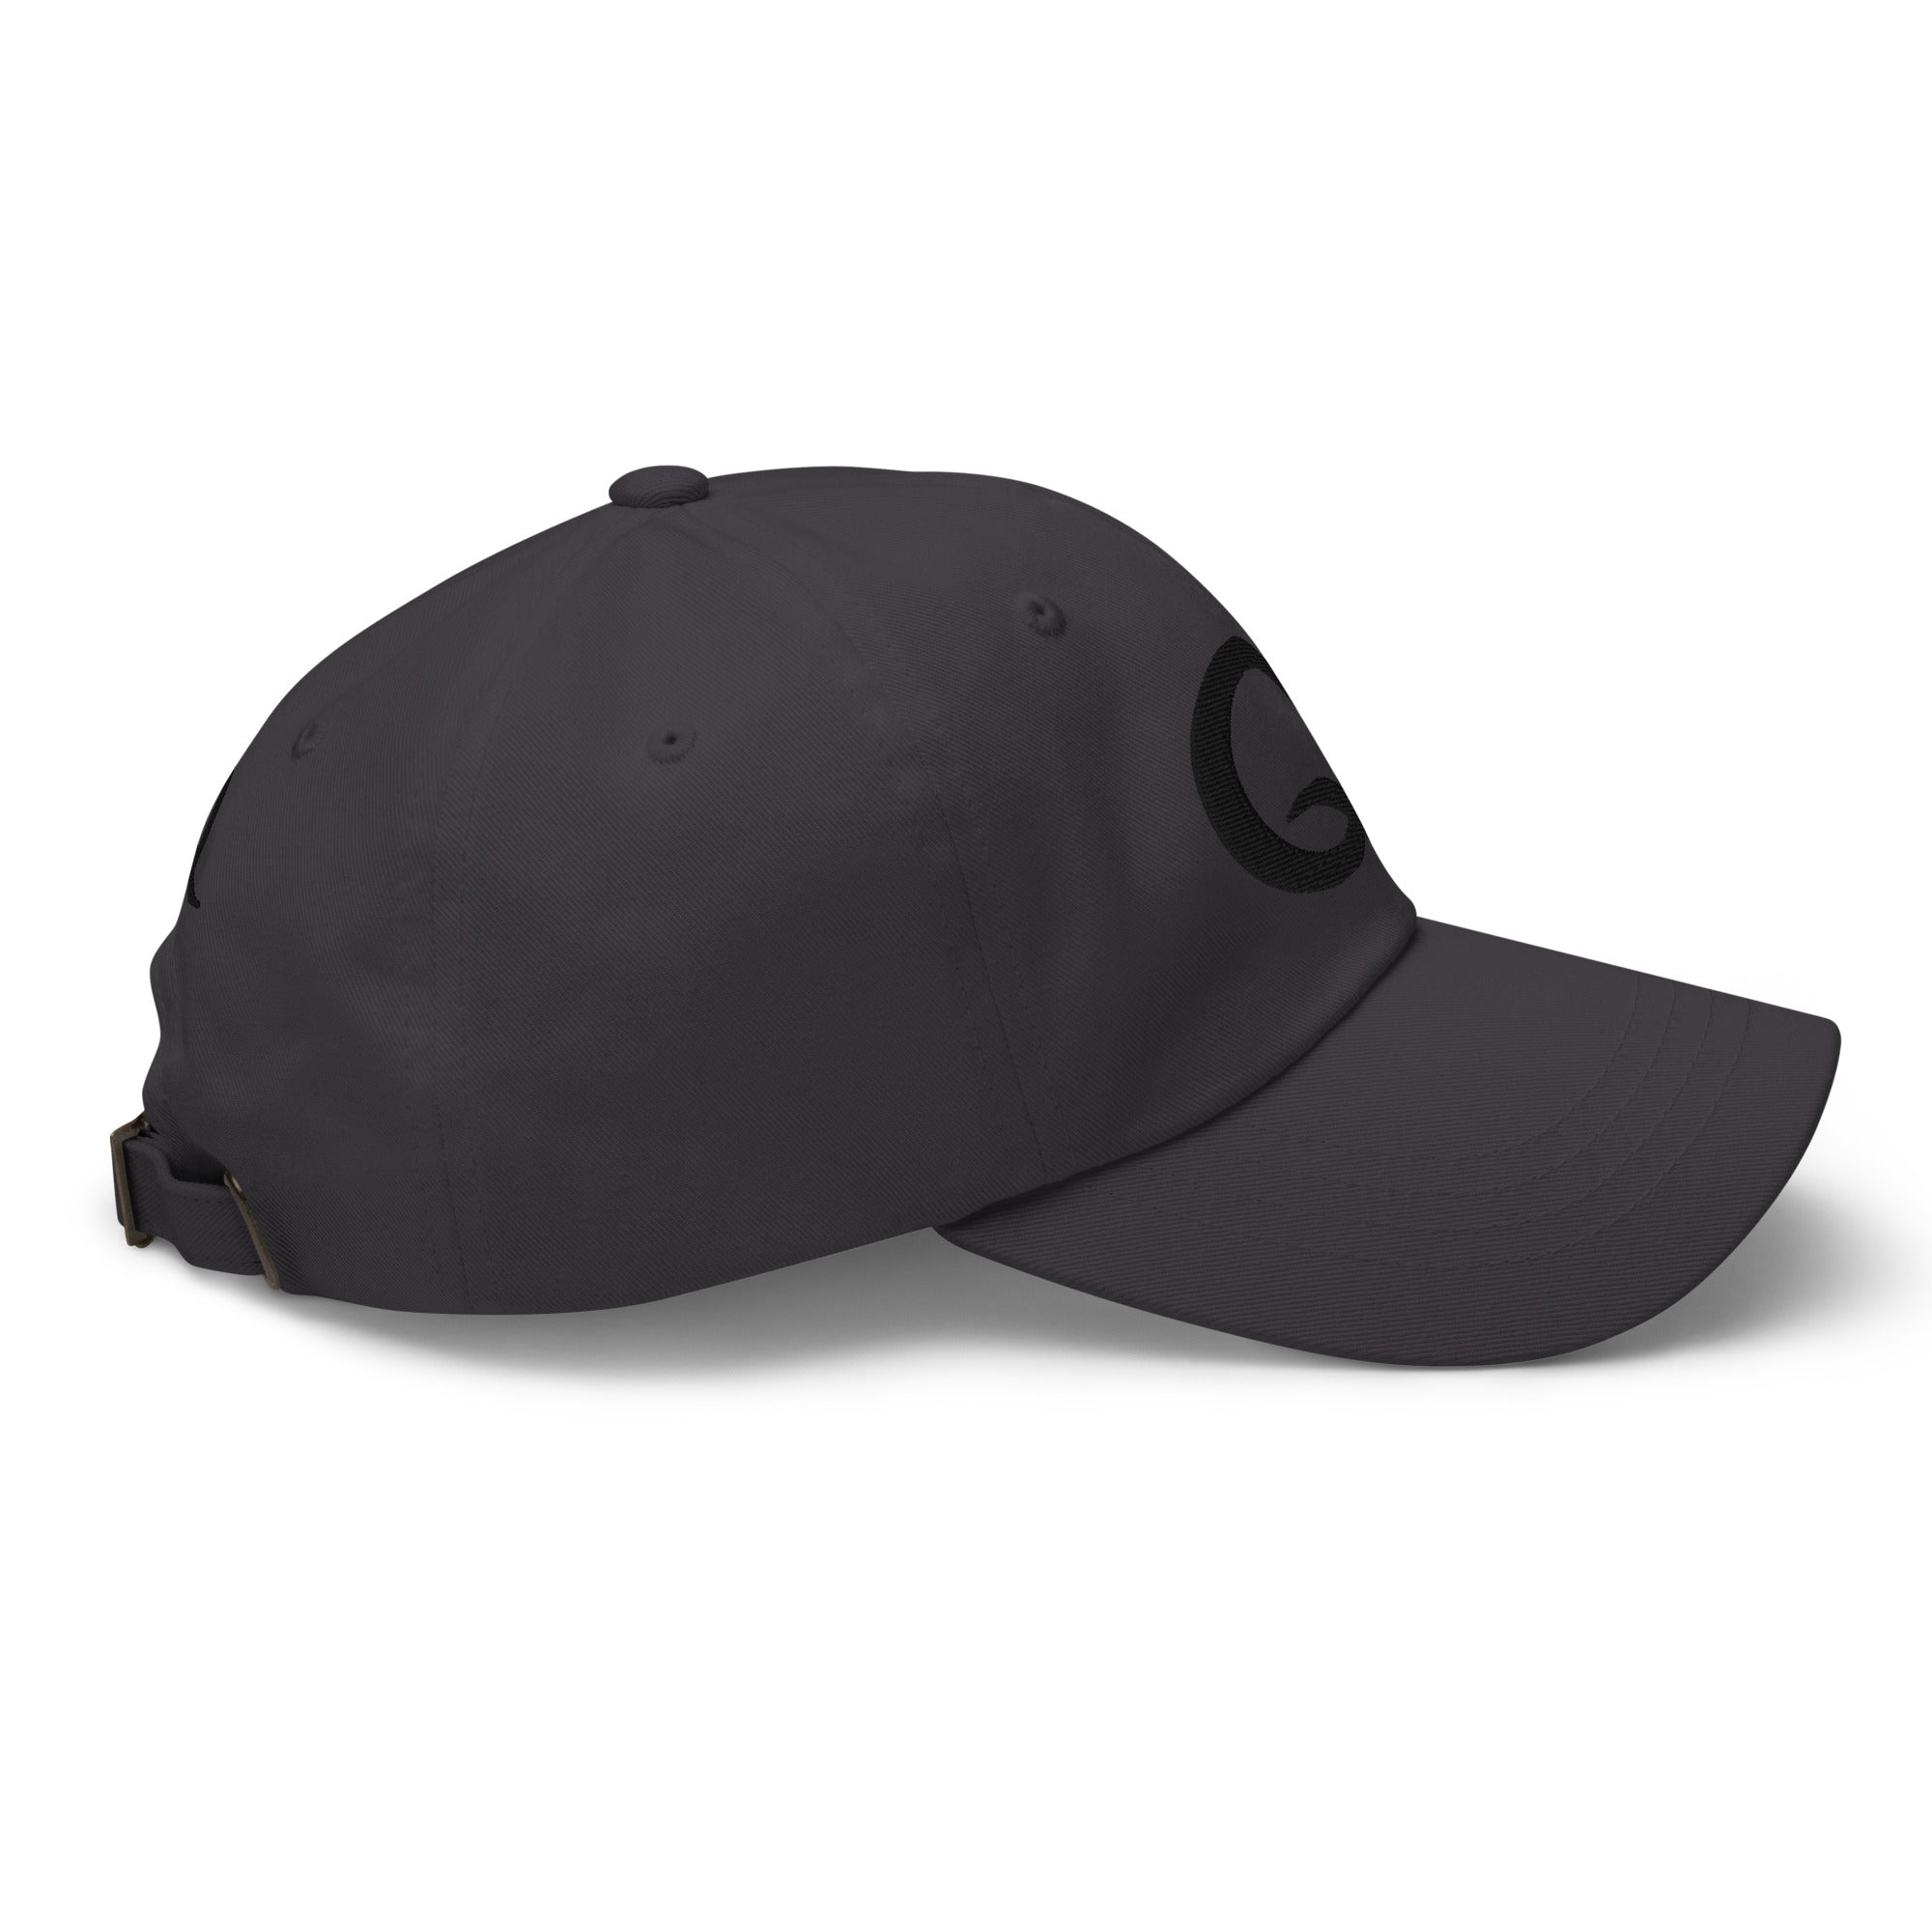 Qoo10 - iMucci GOOD Quality Brand Golf Cap for Men and Women Leisure Caps  Casq : Household & Bedd